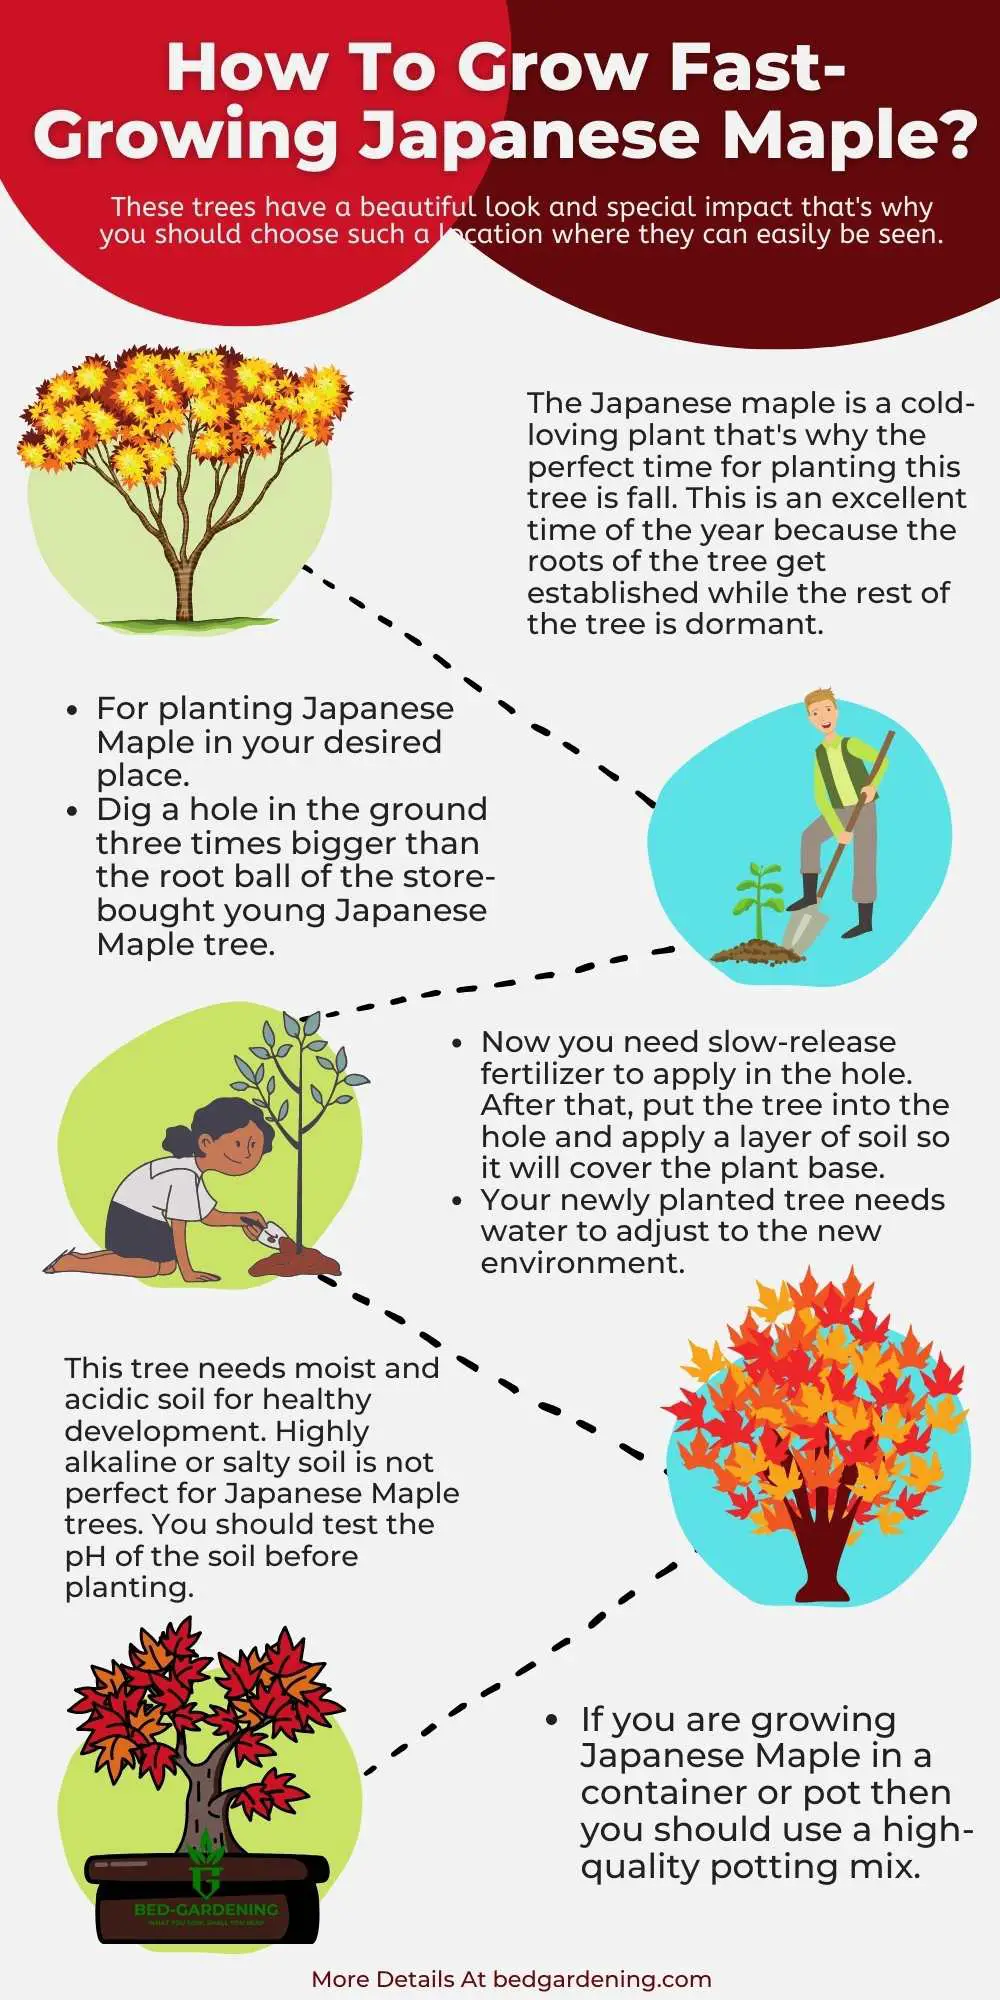 Fast-Growing Japanese Maple infographic